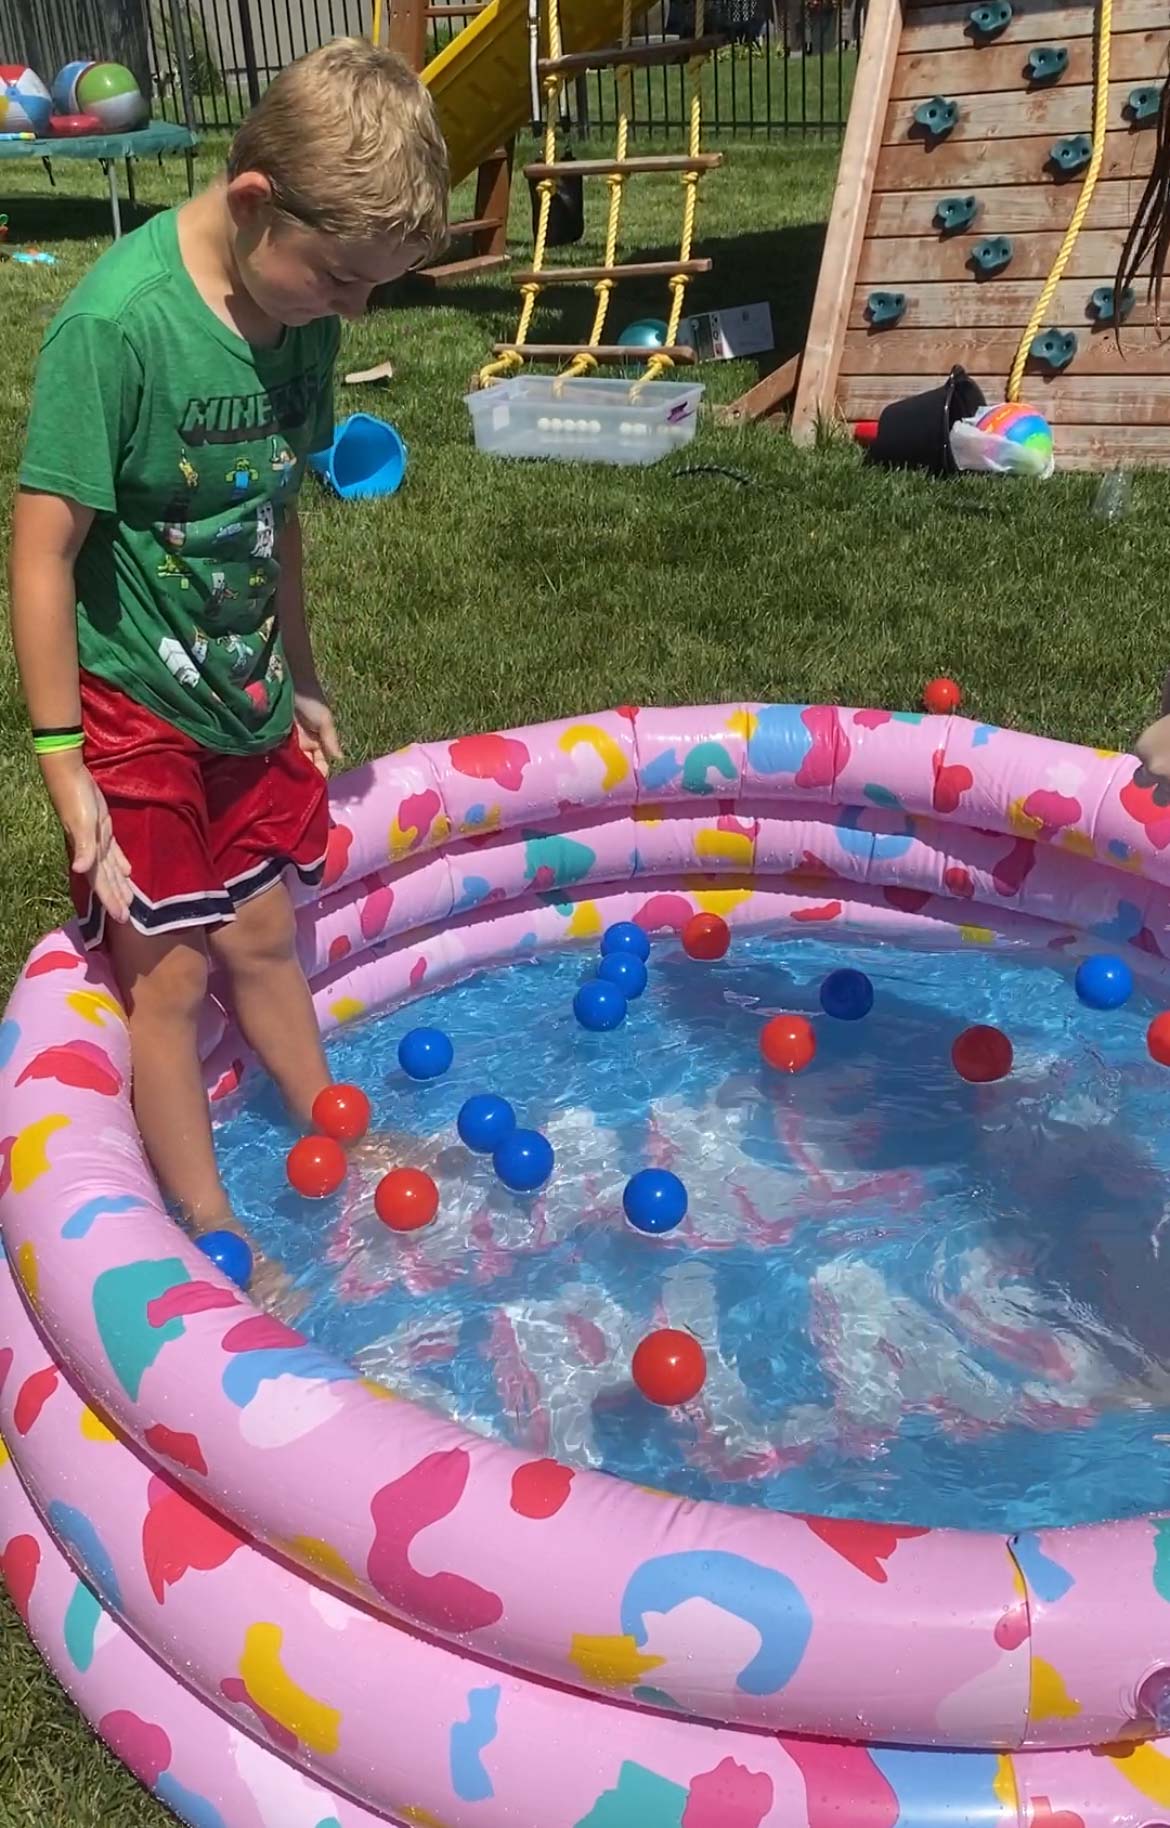 kid standing in a pool with balls